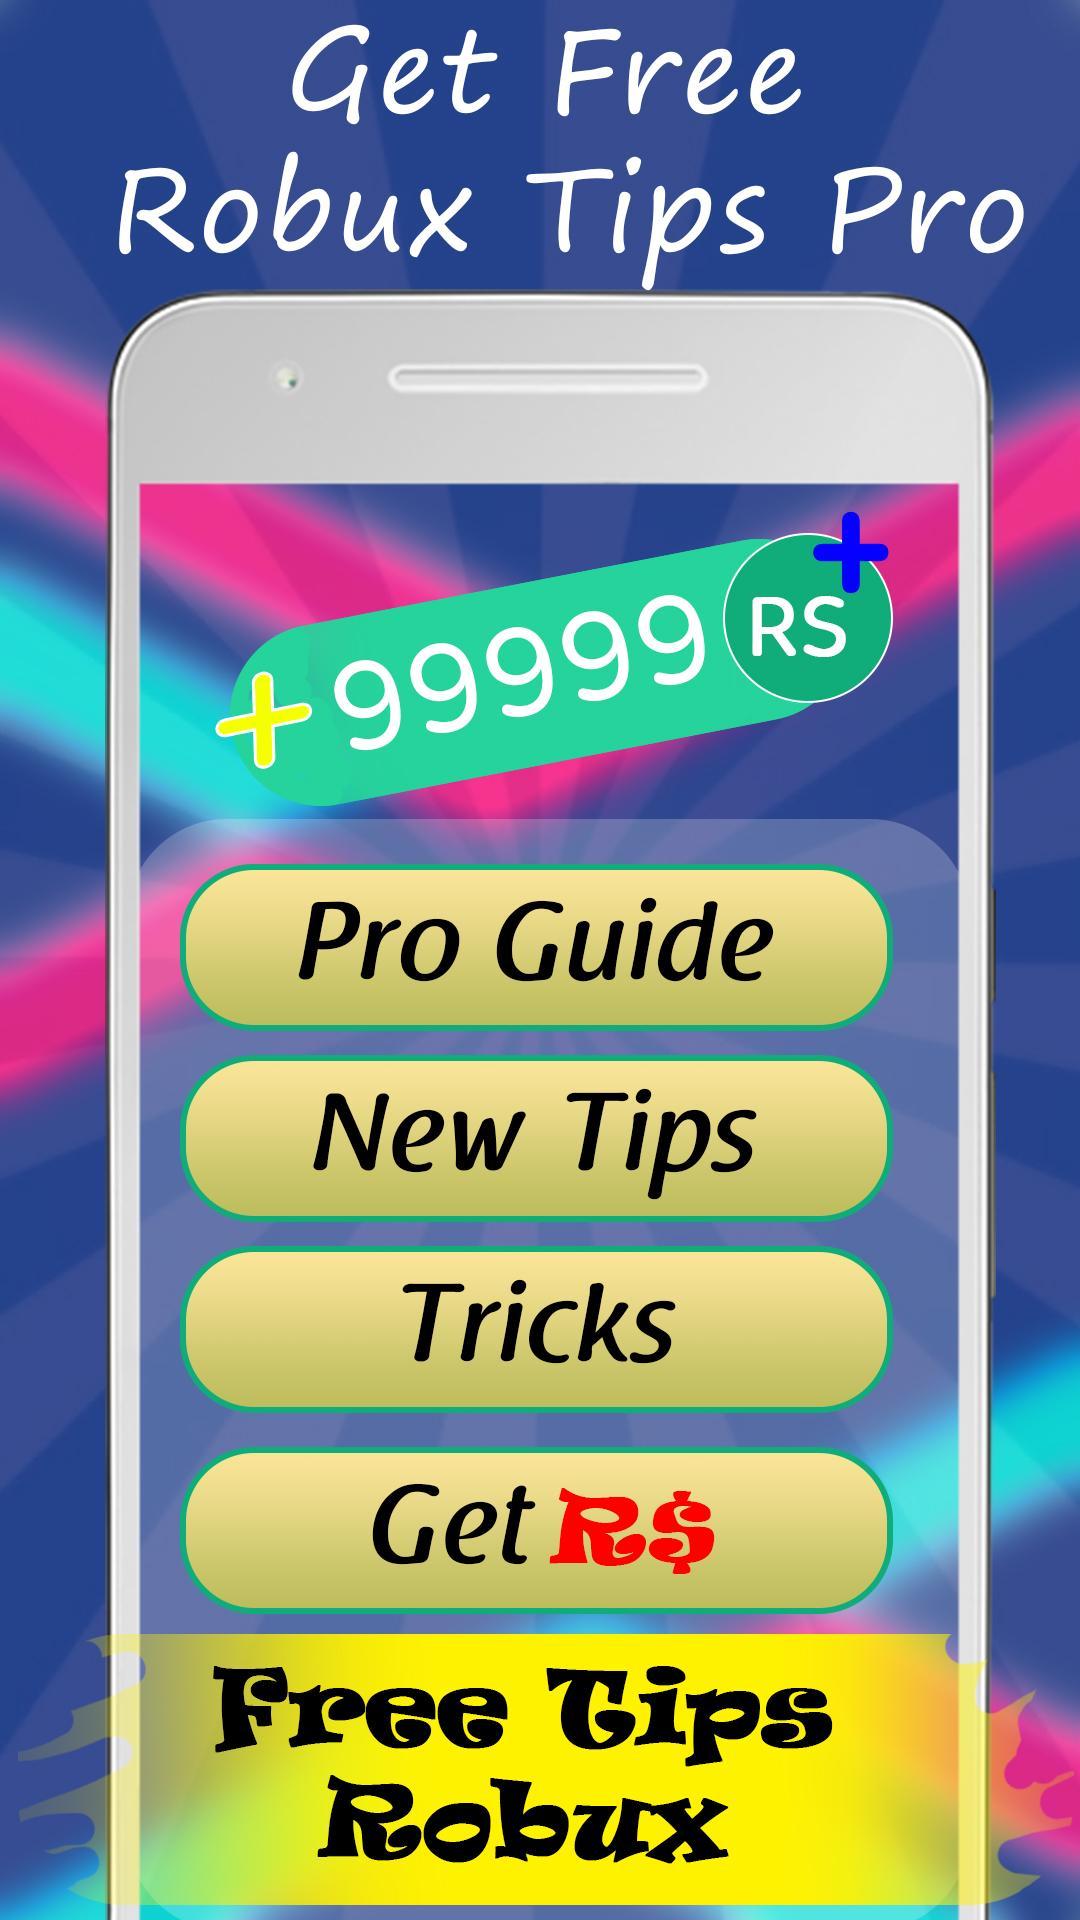 Get New Free Tips Robux For Roblox Guide 2k19 For Android Apk - new roblox 2 robux game guide for android apk download